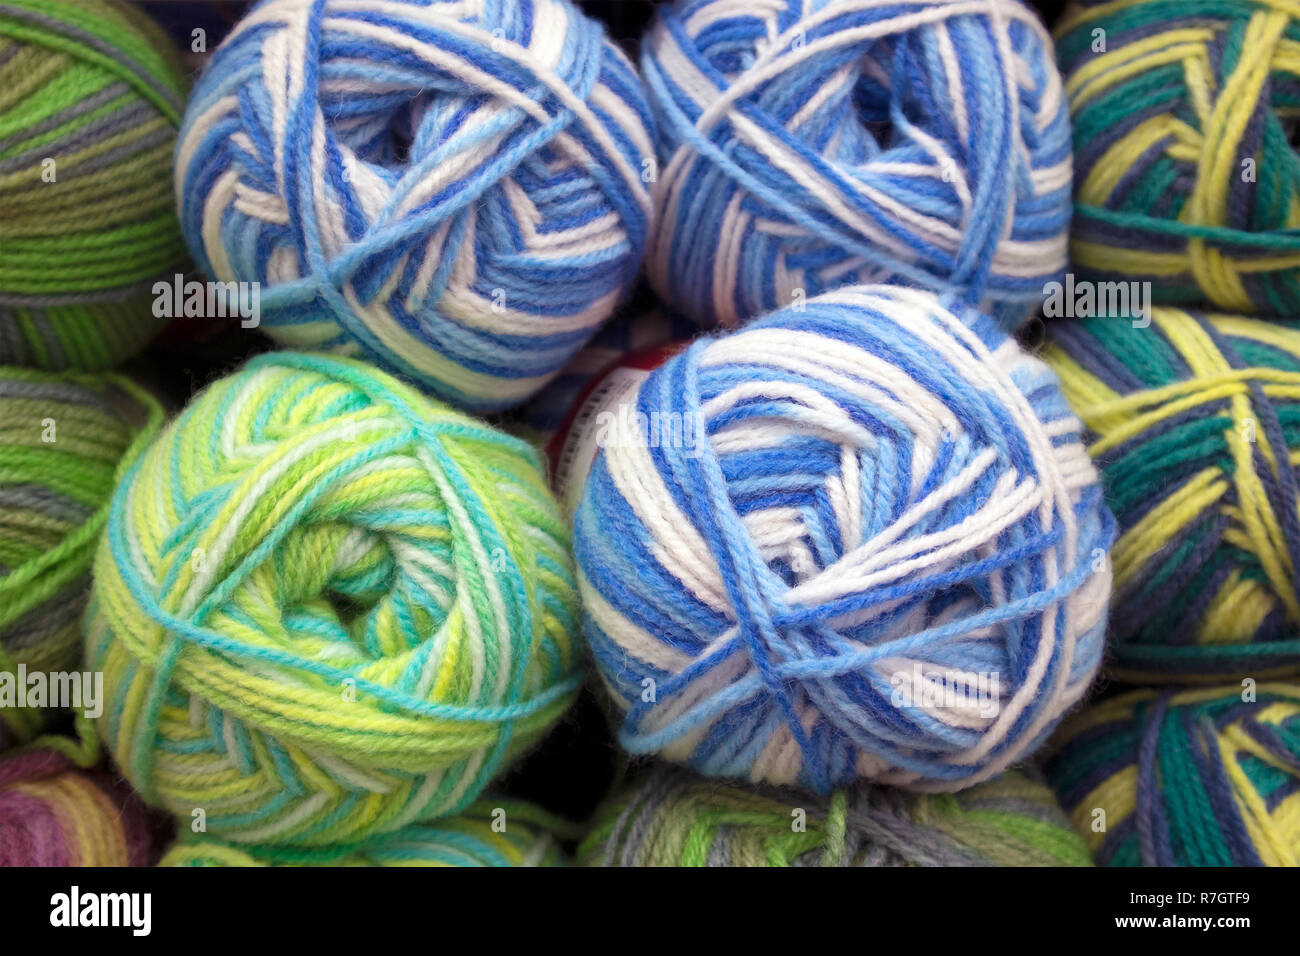 A number of multicolored woolen skeins arranged in rows on a store shelf, yarn texture Stock Photo